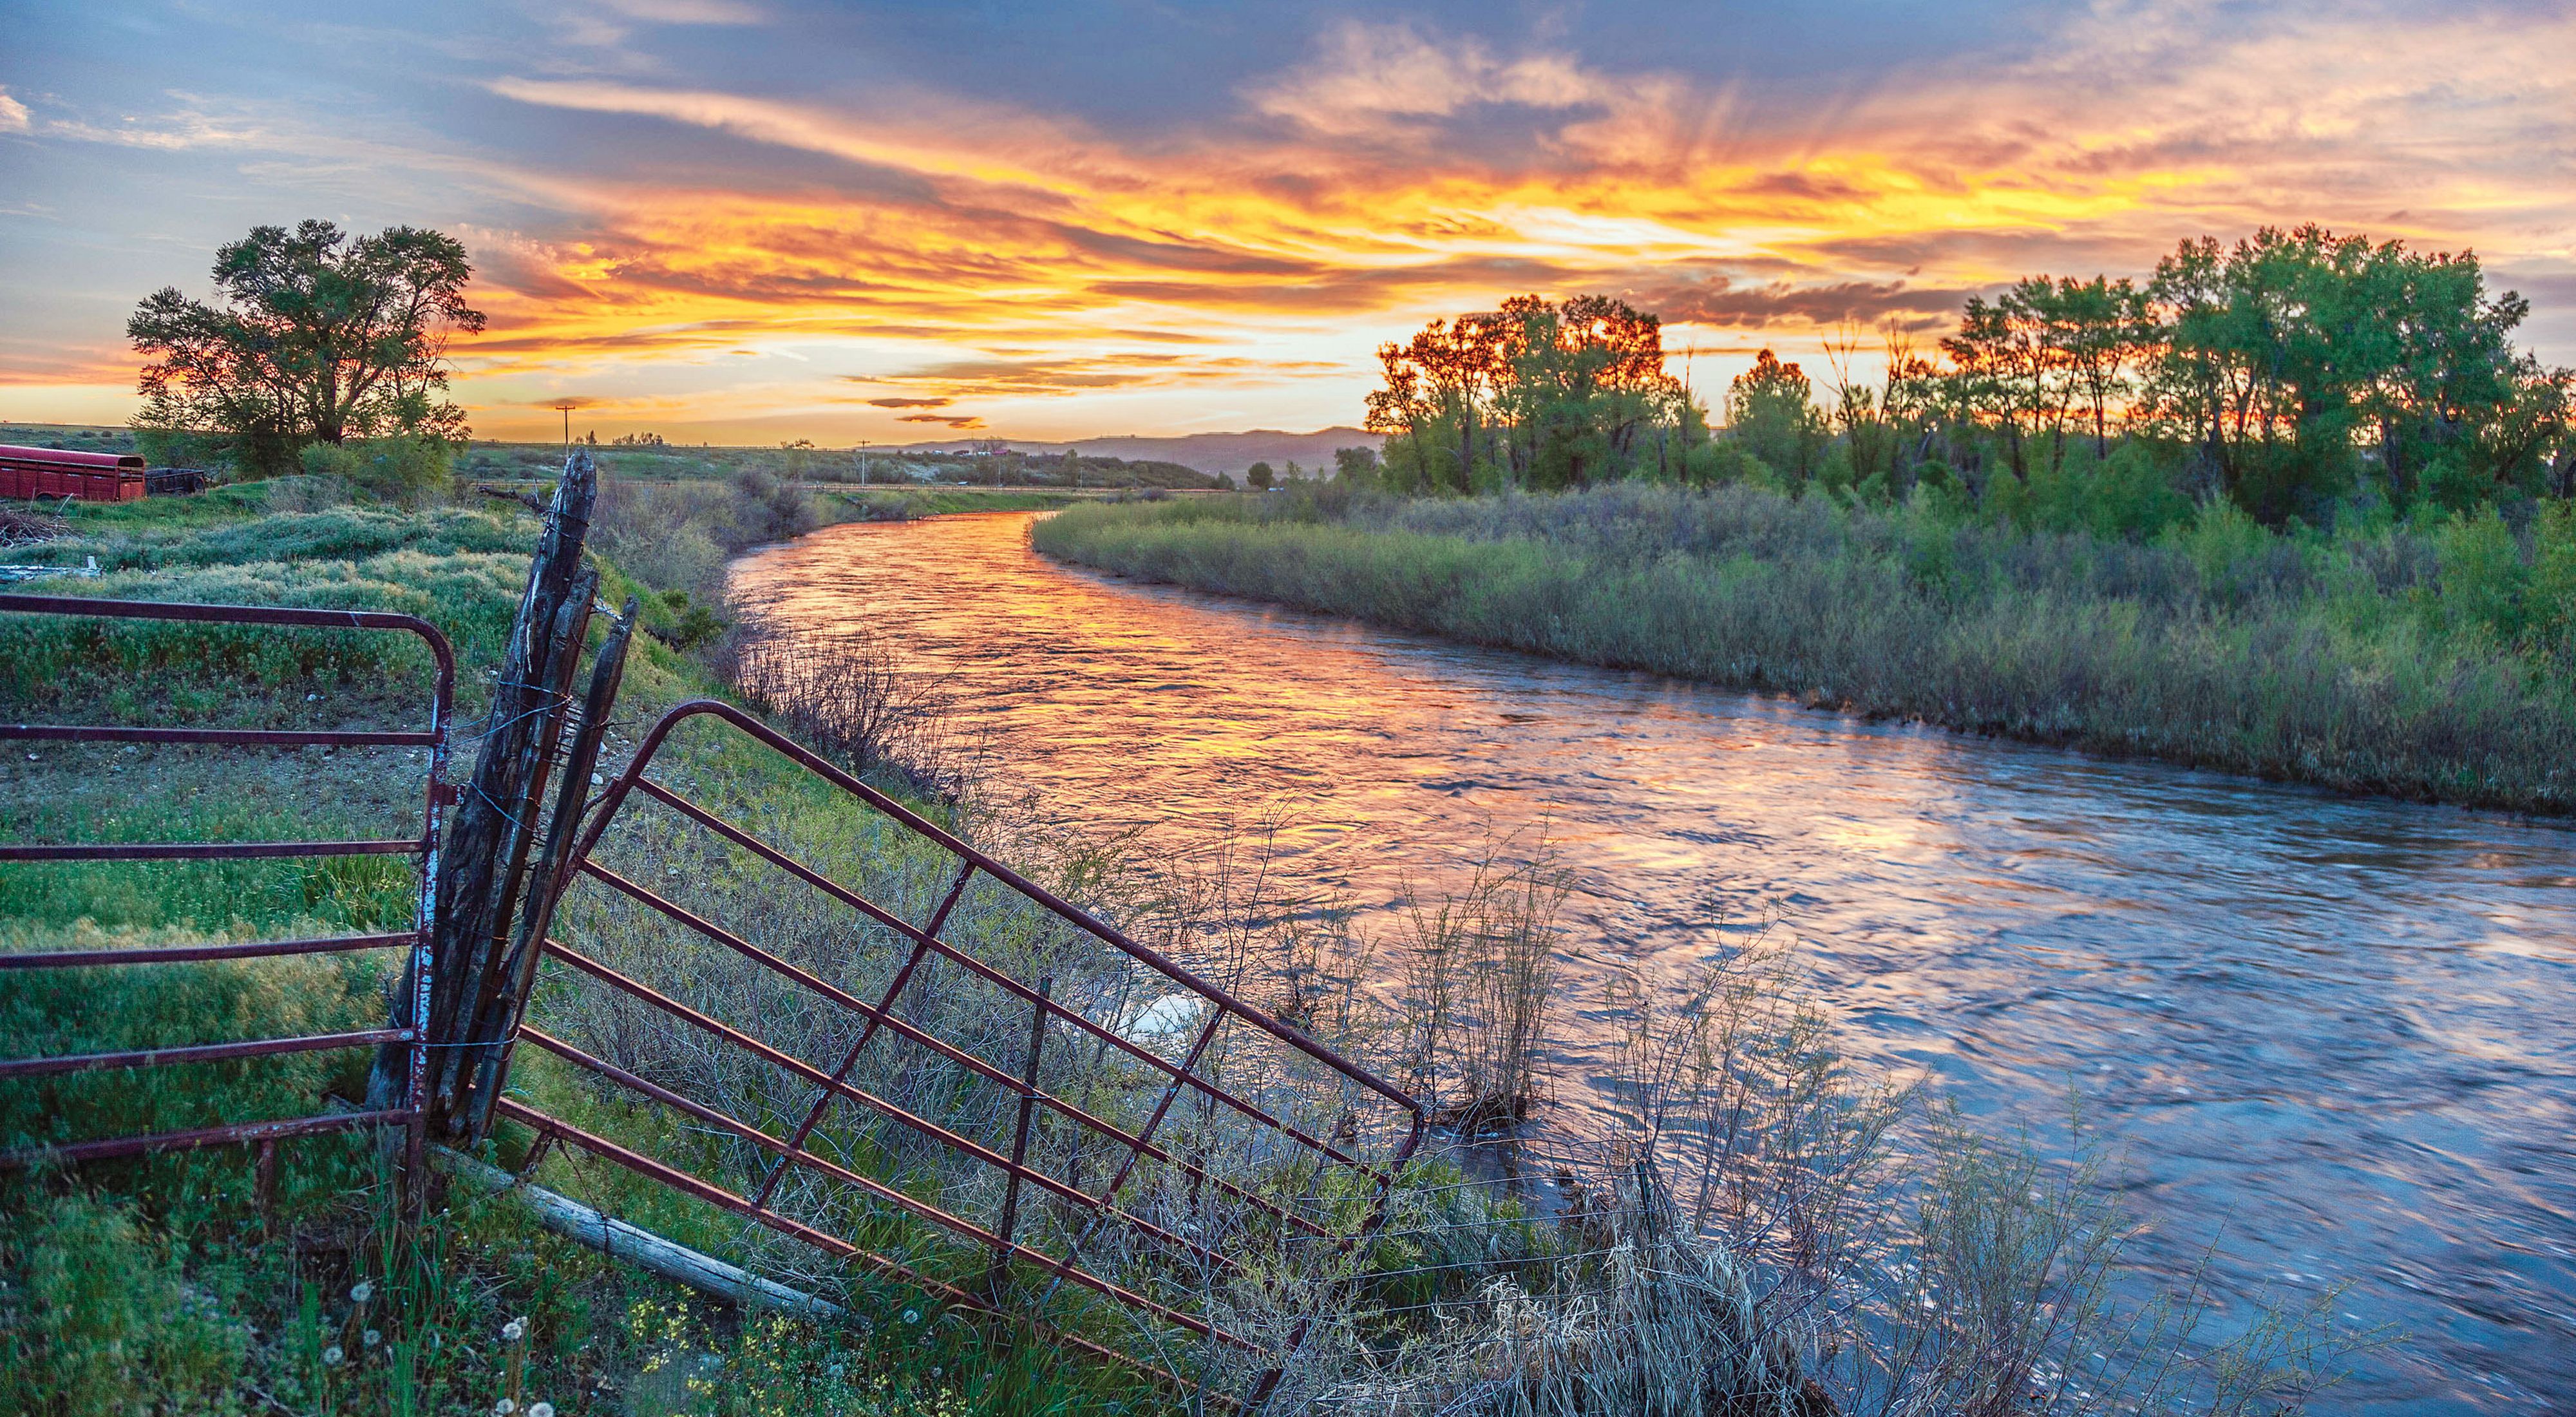 Sunset on the Yampa River at Carpenter Ranch in Northwest Colorado.   